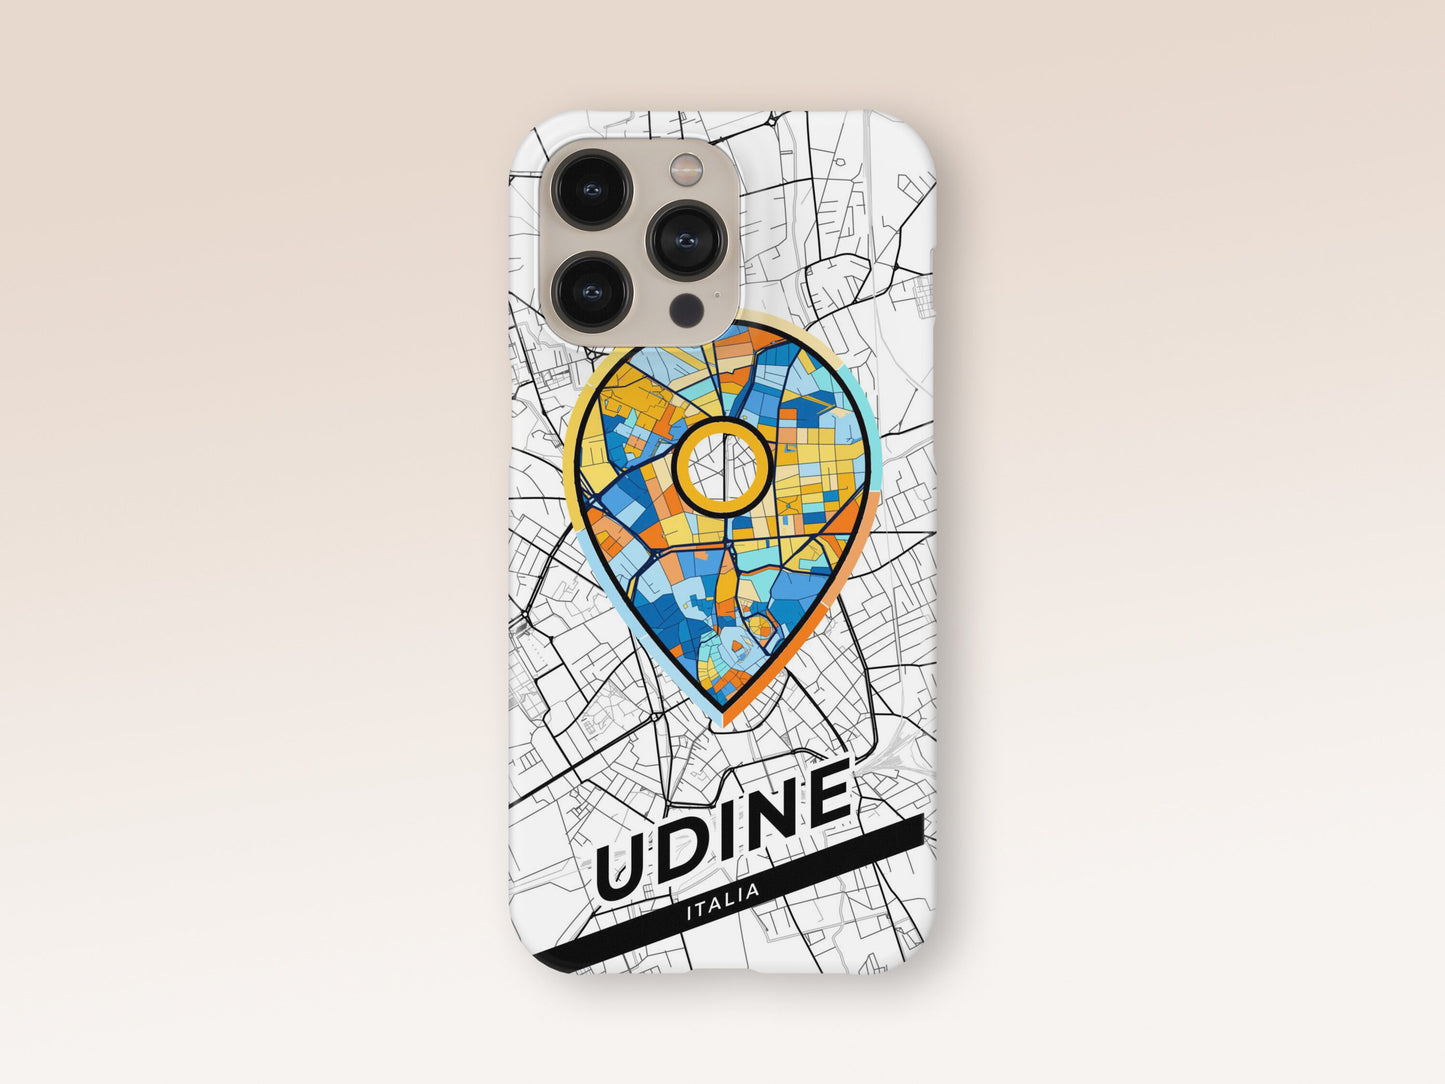 Udine Italy slim phone case with colorful icon 1